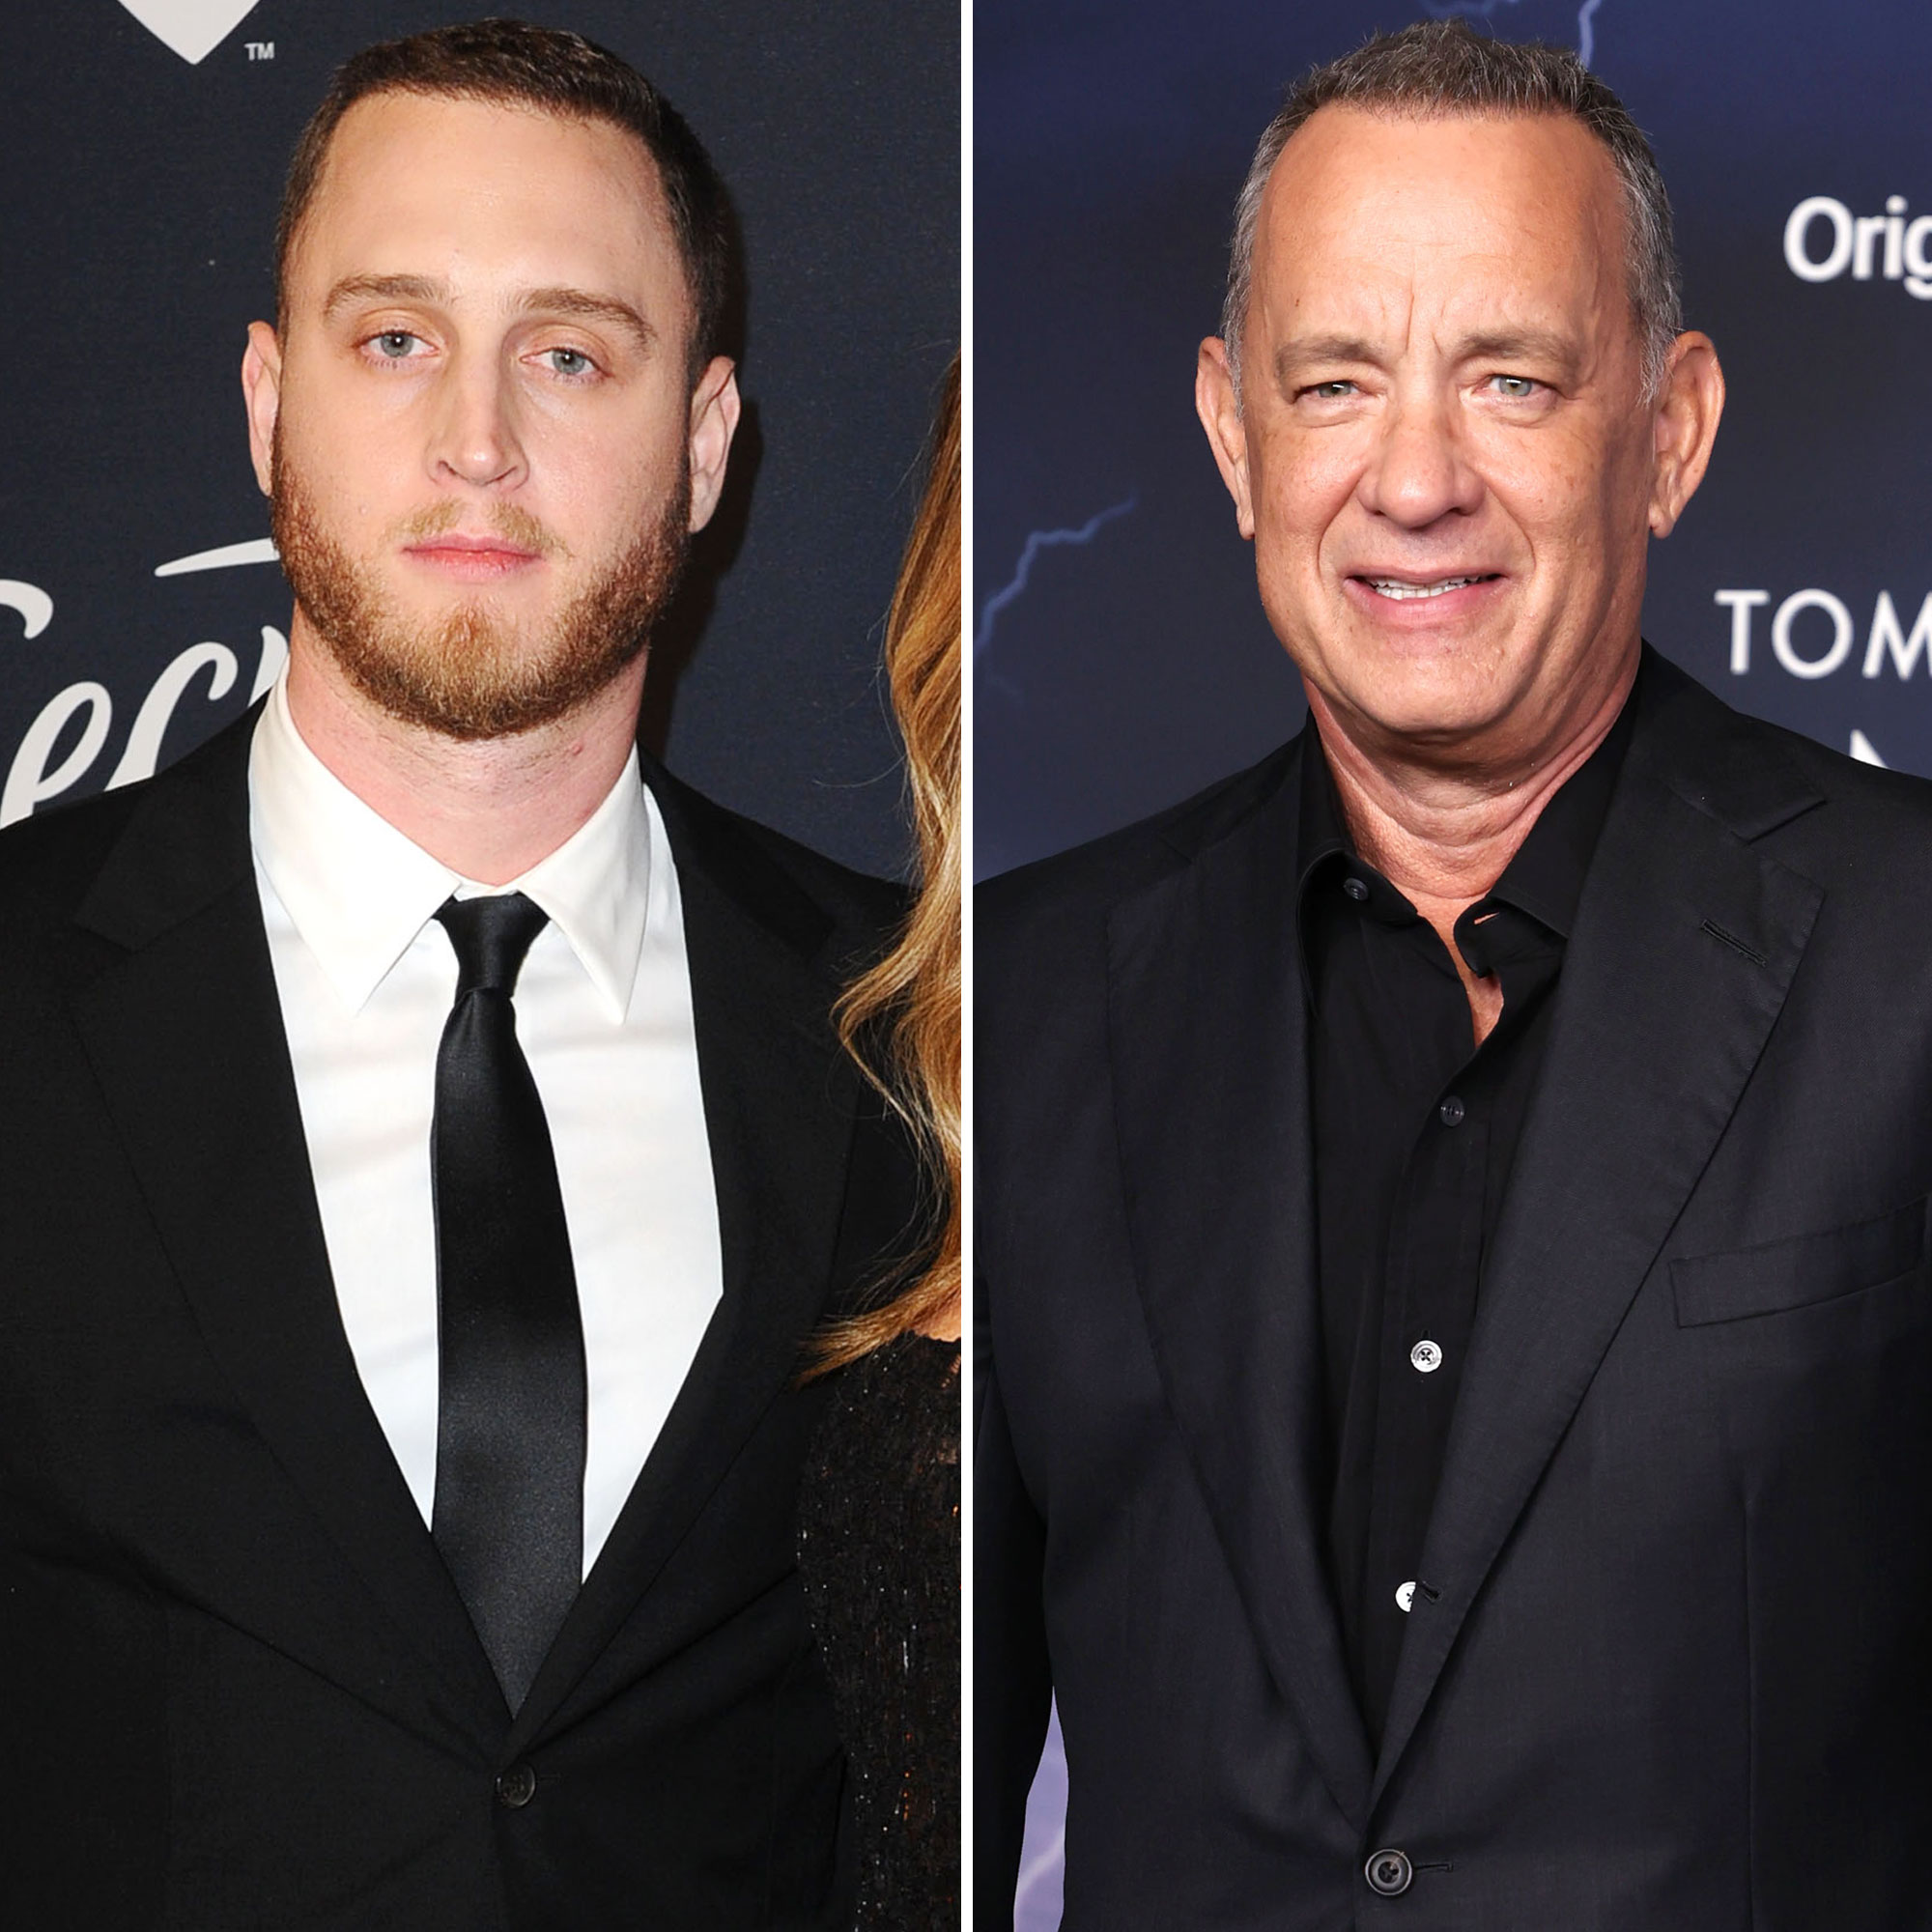 Chet Hanks' Quotes About Relationship With Dad Tom Hanks, Their Family